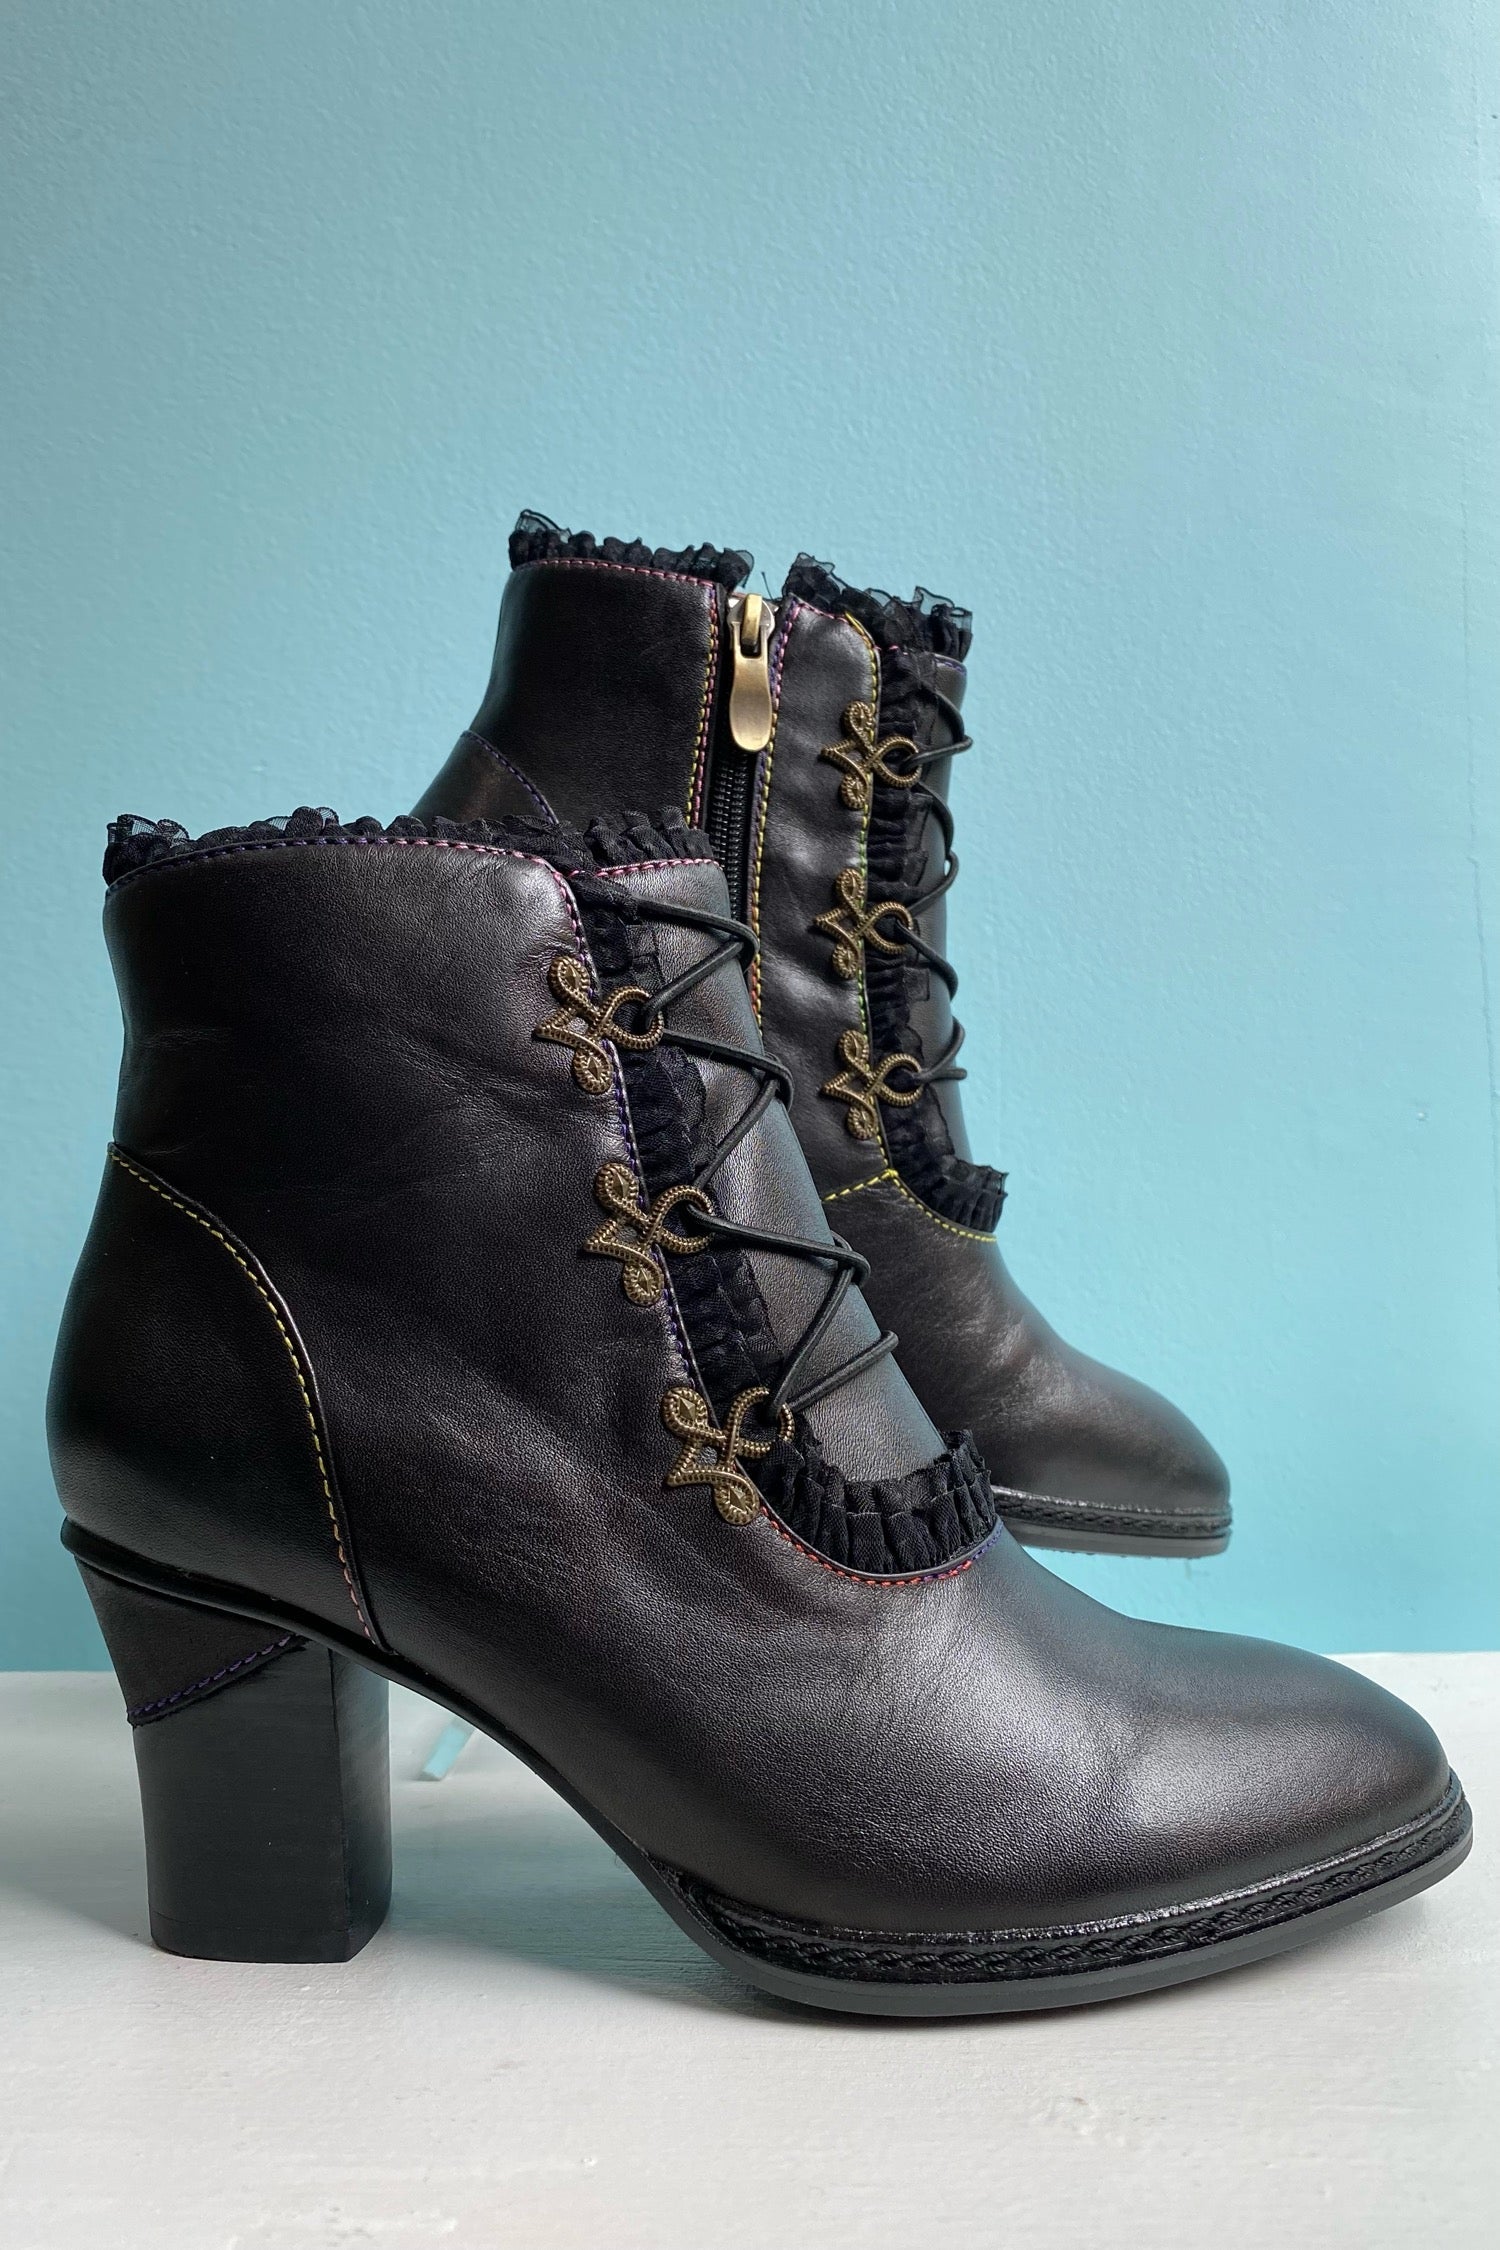 Black Galleria Ankle Boots by Chelsea Crew Modern Millie